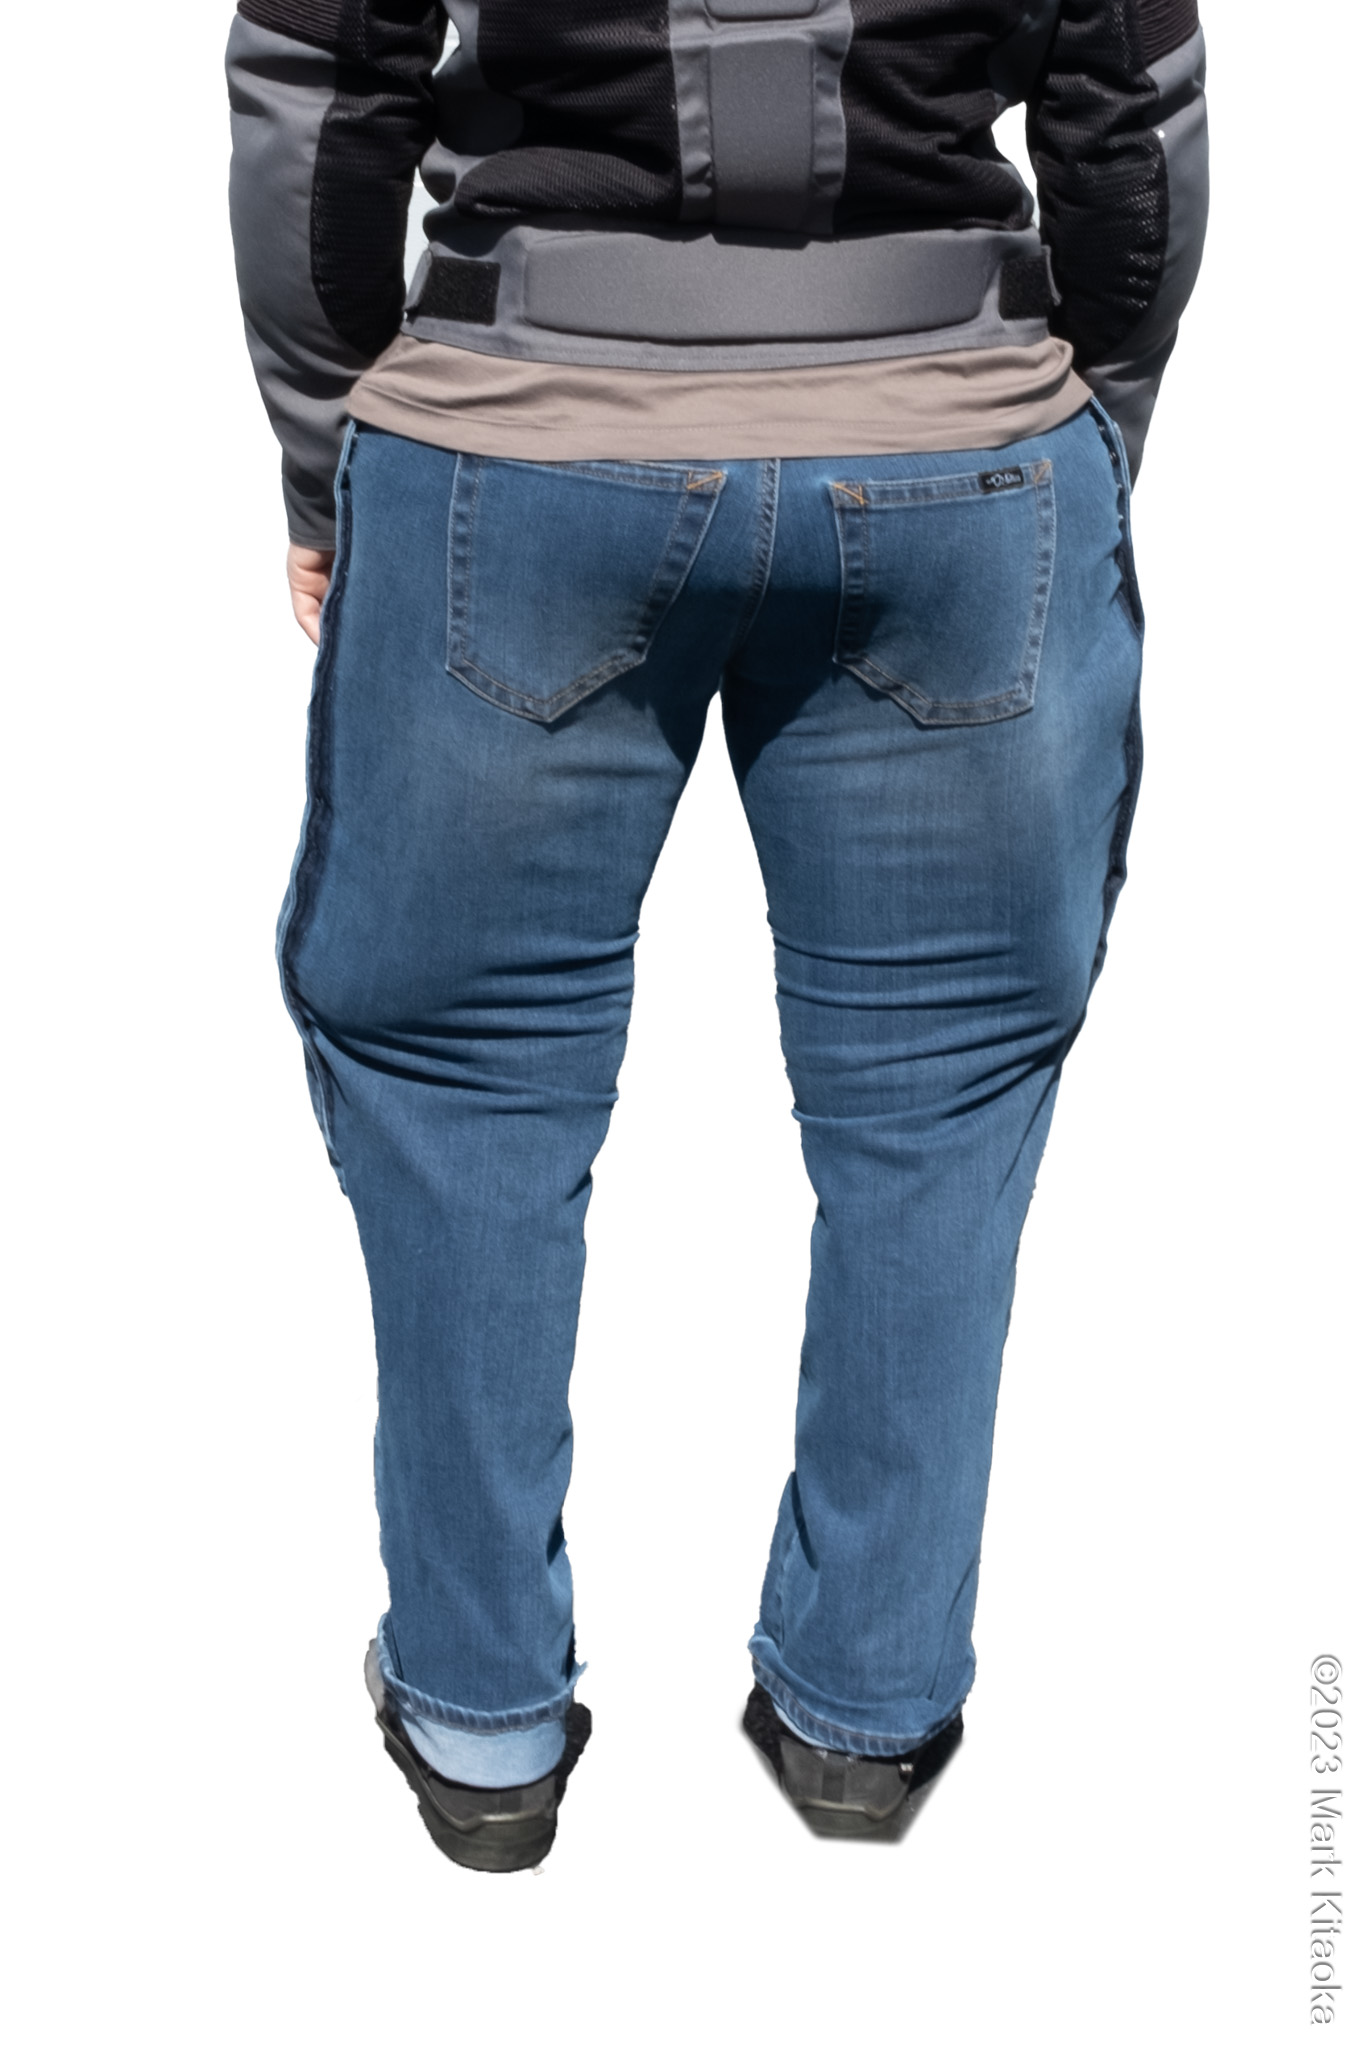 Rear view of the pants with airbags activated